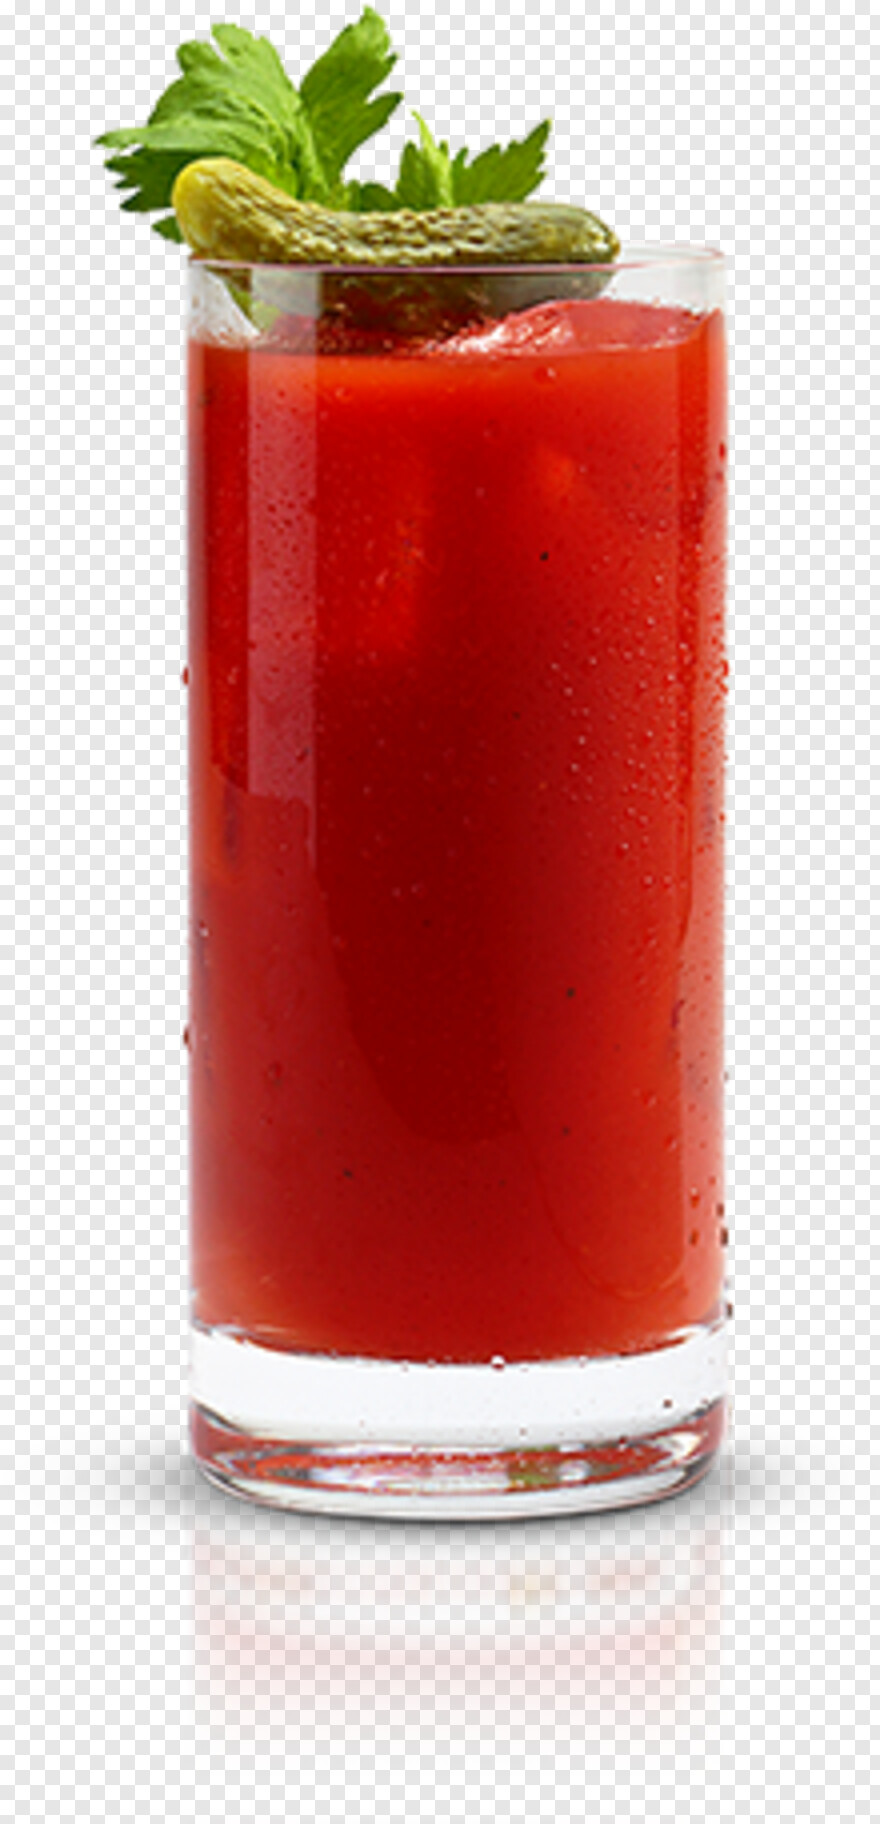 bloody-mary # 344725